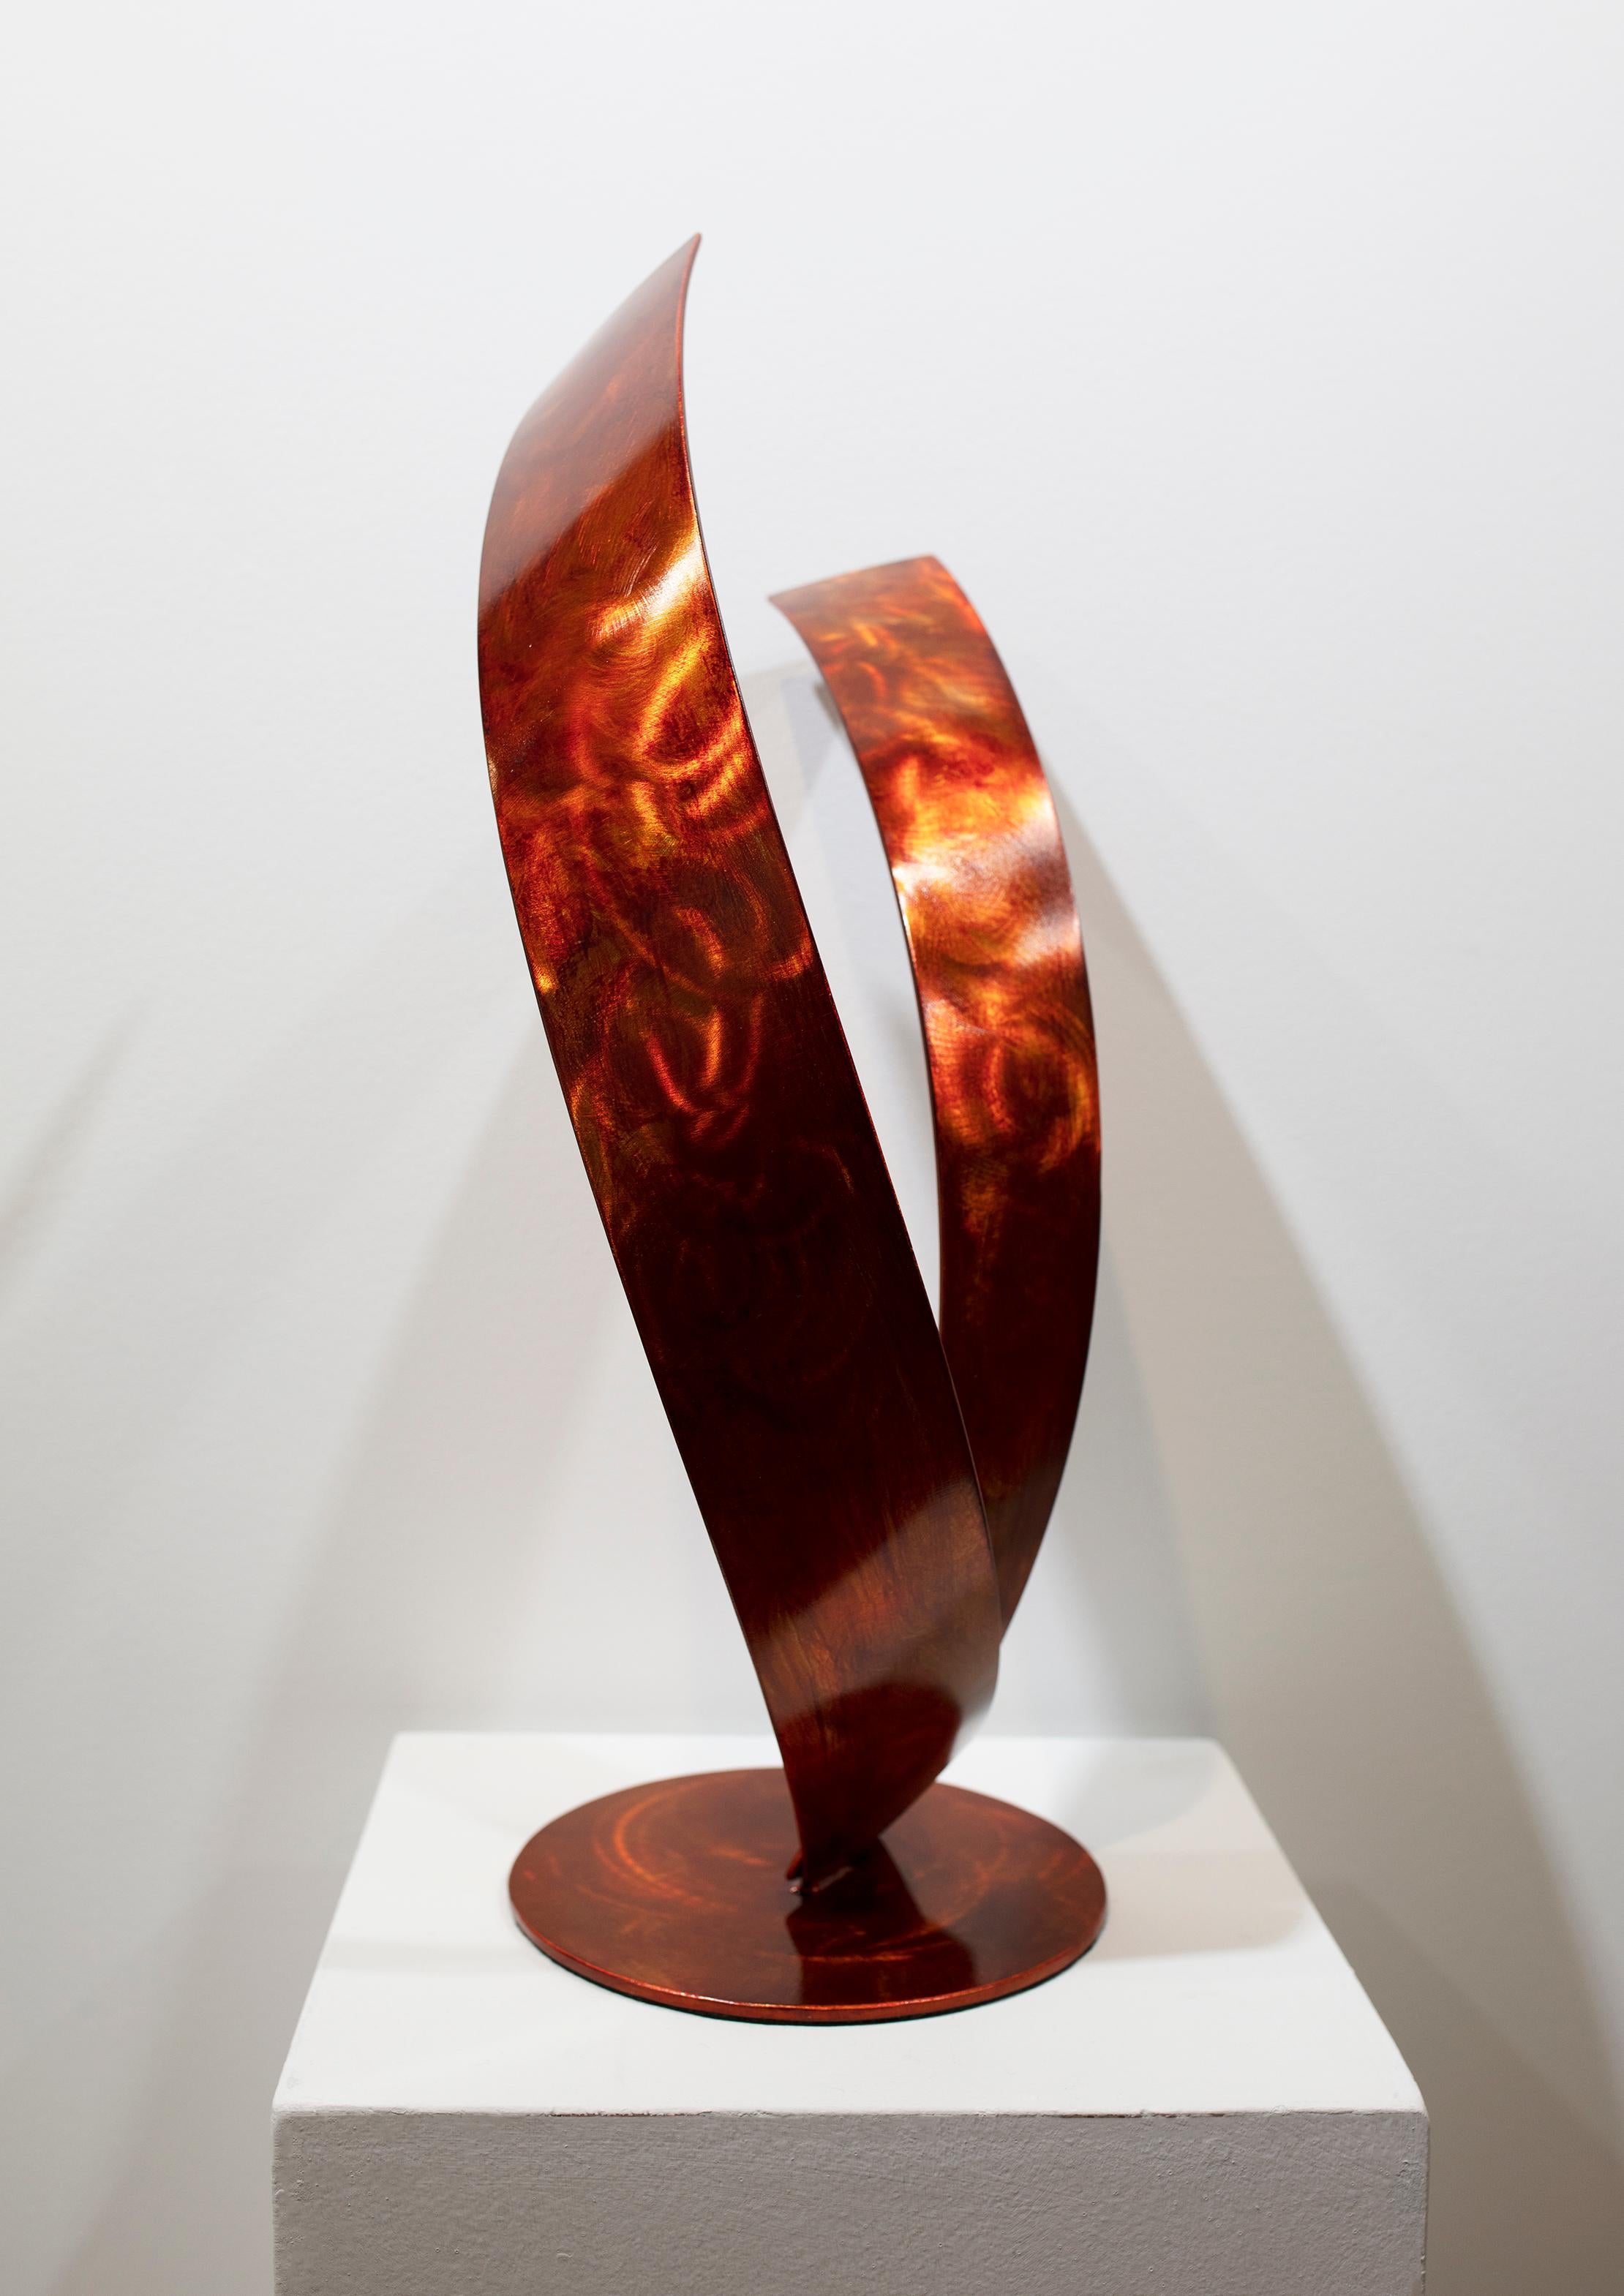 Orange Wave is a tabletop sculpture made out of stainless steel with an orange dye and clear coat. 

Connecticut sculptor Joe Sorge says about his work, 